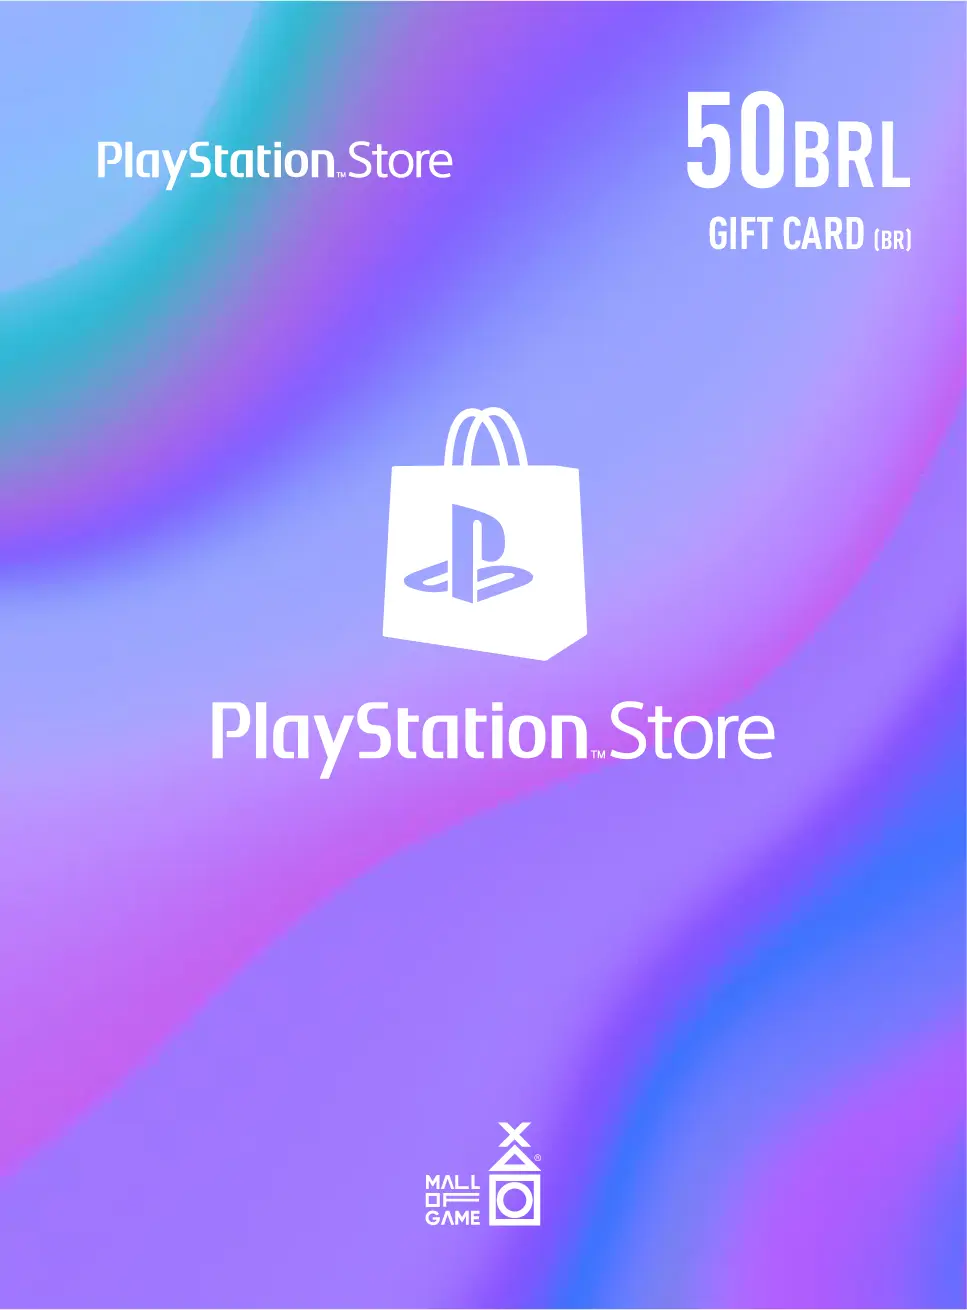 PlayStation™Store BRL50 Gift Cards (BR)